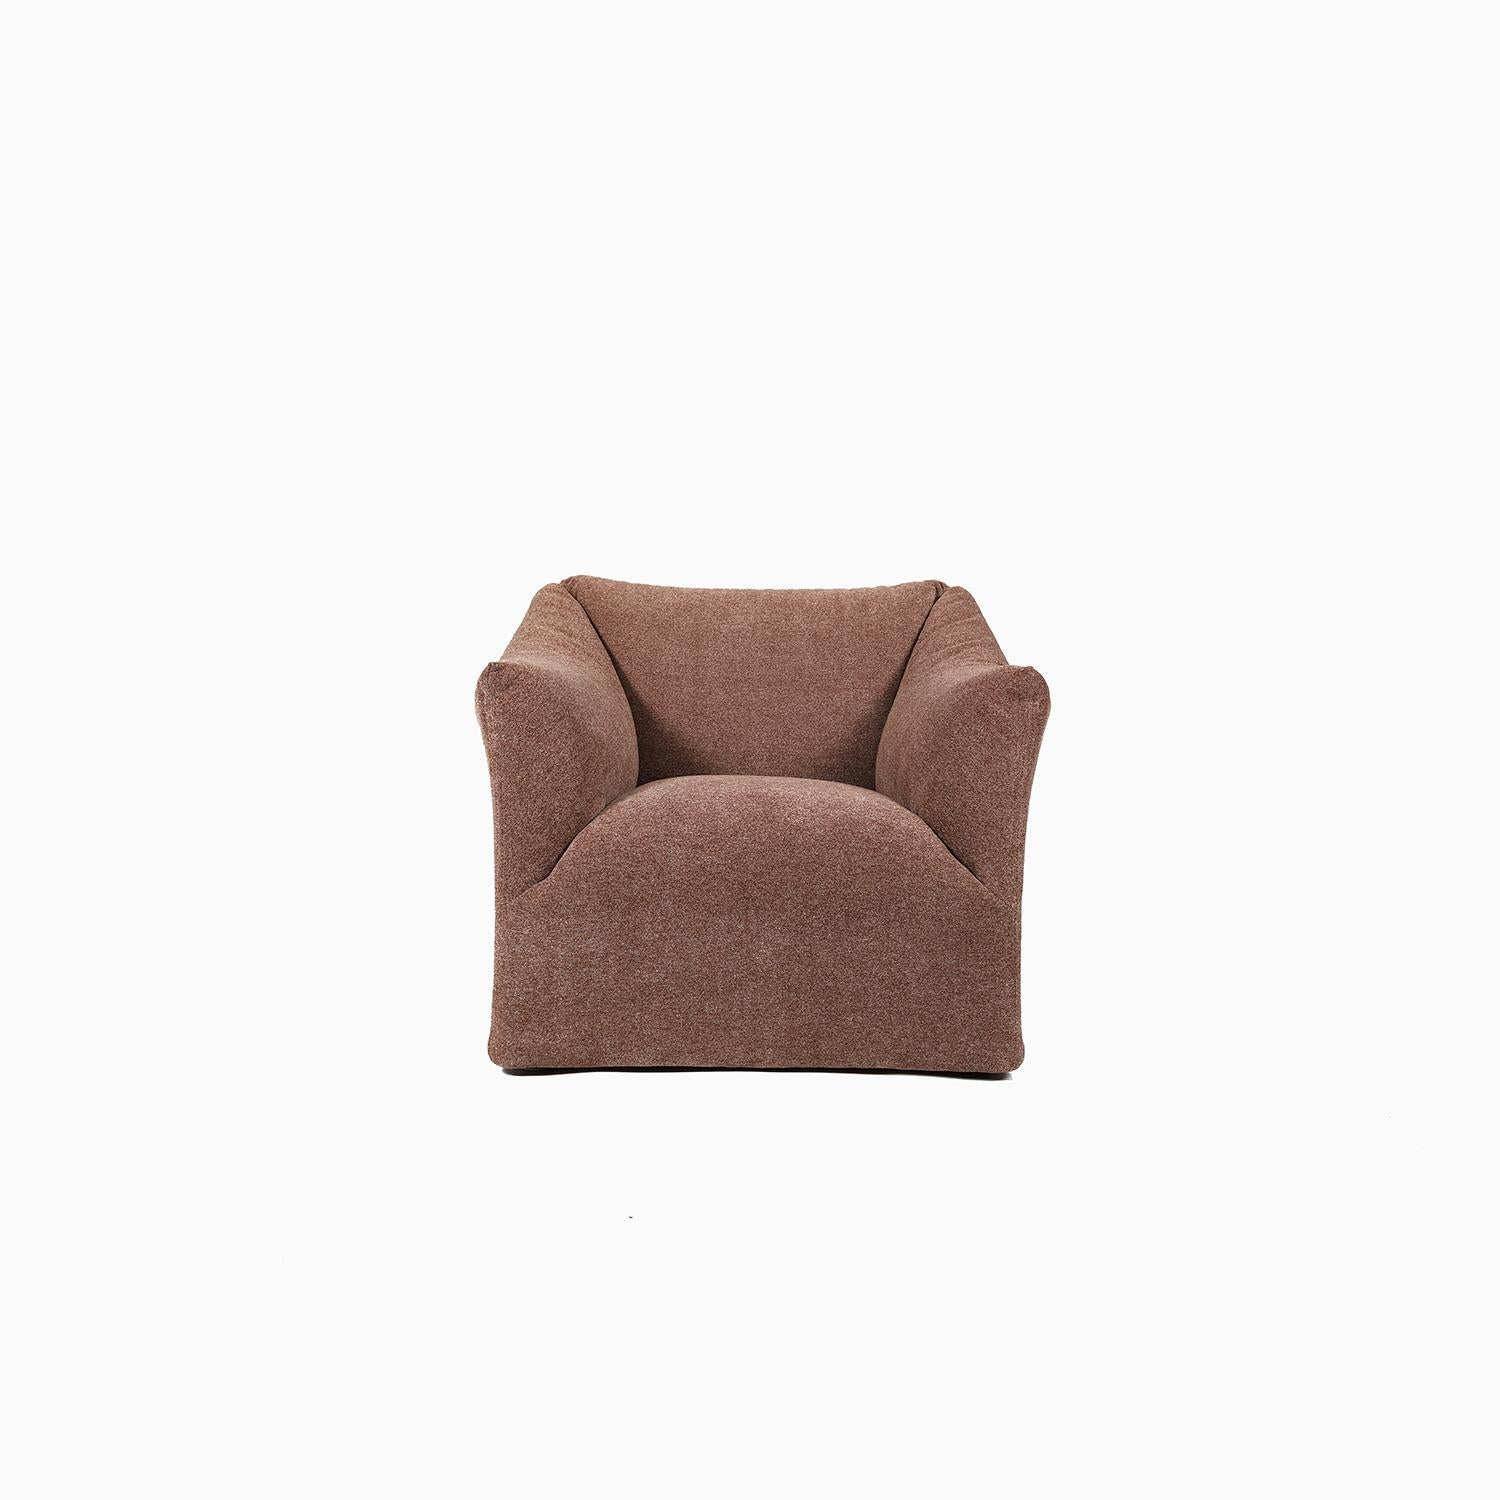 An Italian Post Modern lounge chair designed by Mario Bellini. Ours is produced by early manufacturer Atelier International. Newly upholstered in Pollack textiles ” Zen” Chai. A lounge that will swallow you up in comfort.

Professional, skilled